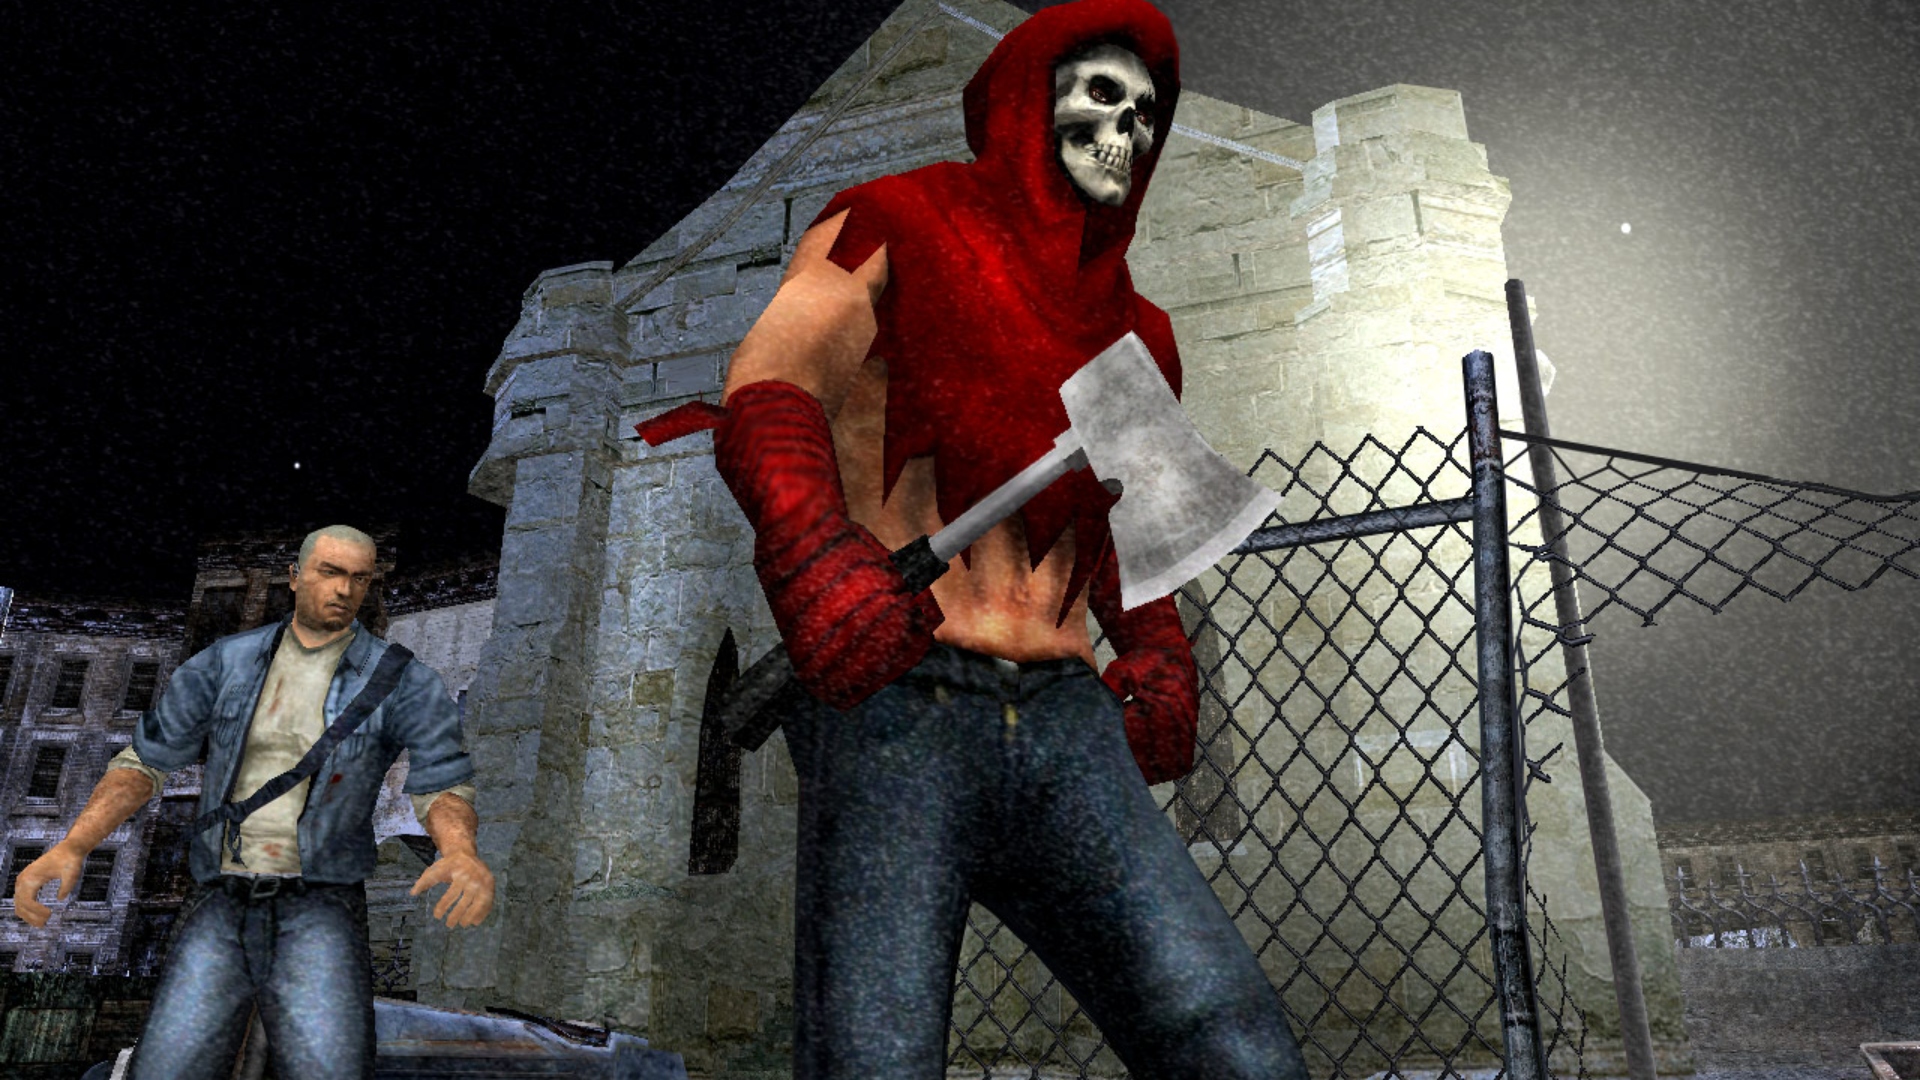 GTA 6 Manhunt 3: A man in red clothes carrying an axe is stalked by James Earl Cash from Rockstar horror game Manhunt